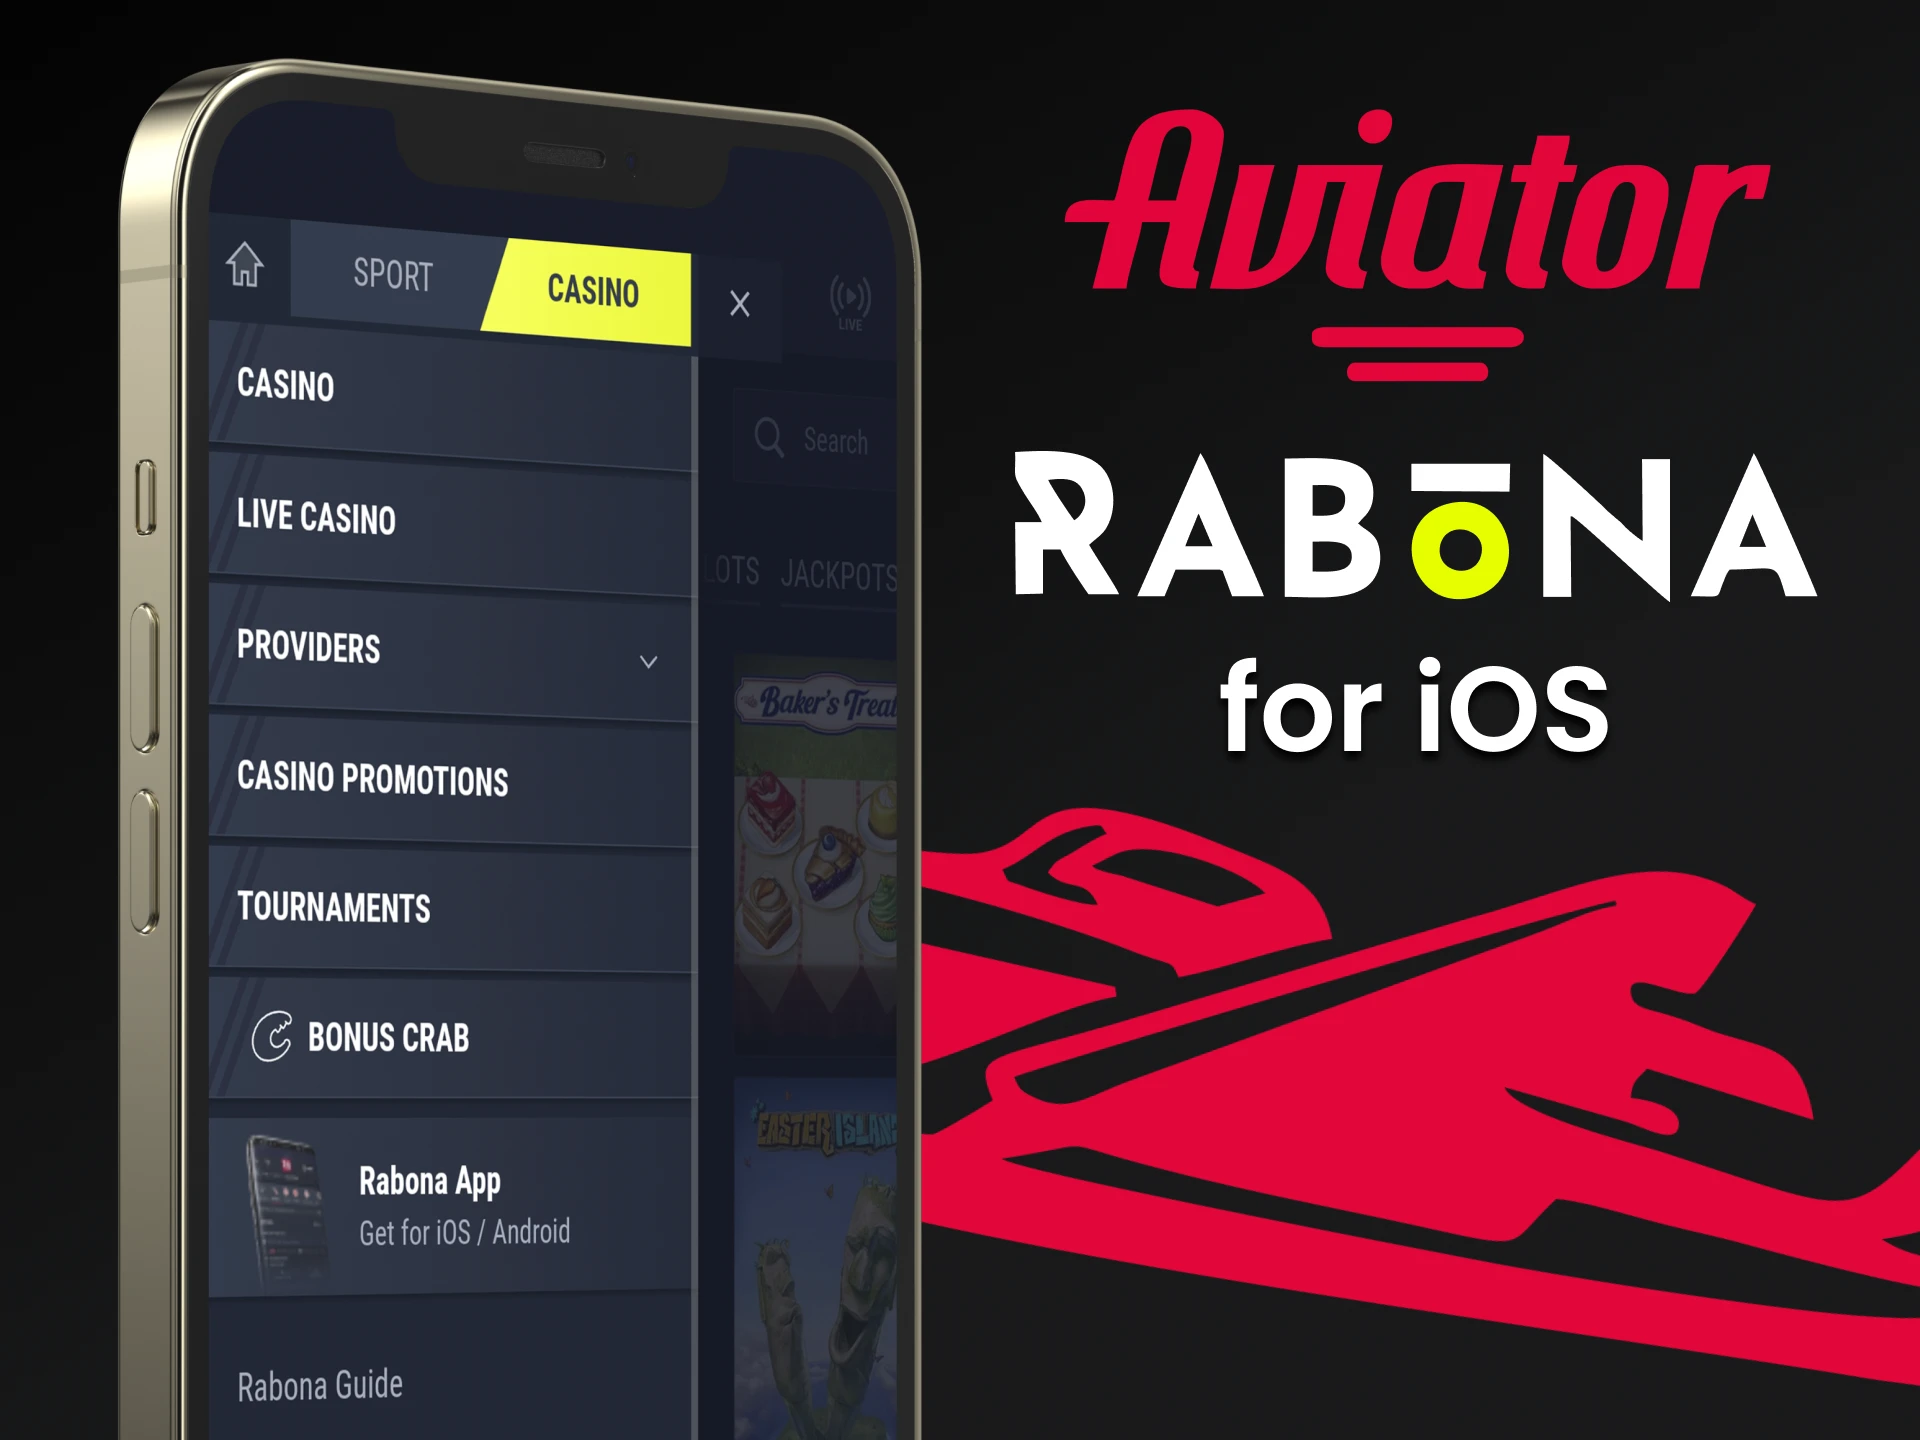 Download the Rabona app on your iOS device to play Aviator.